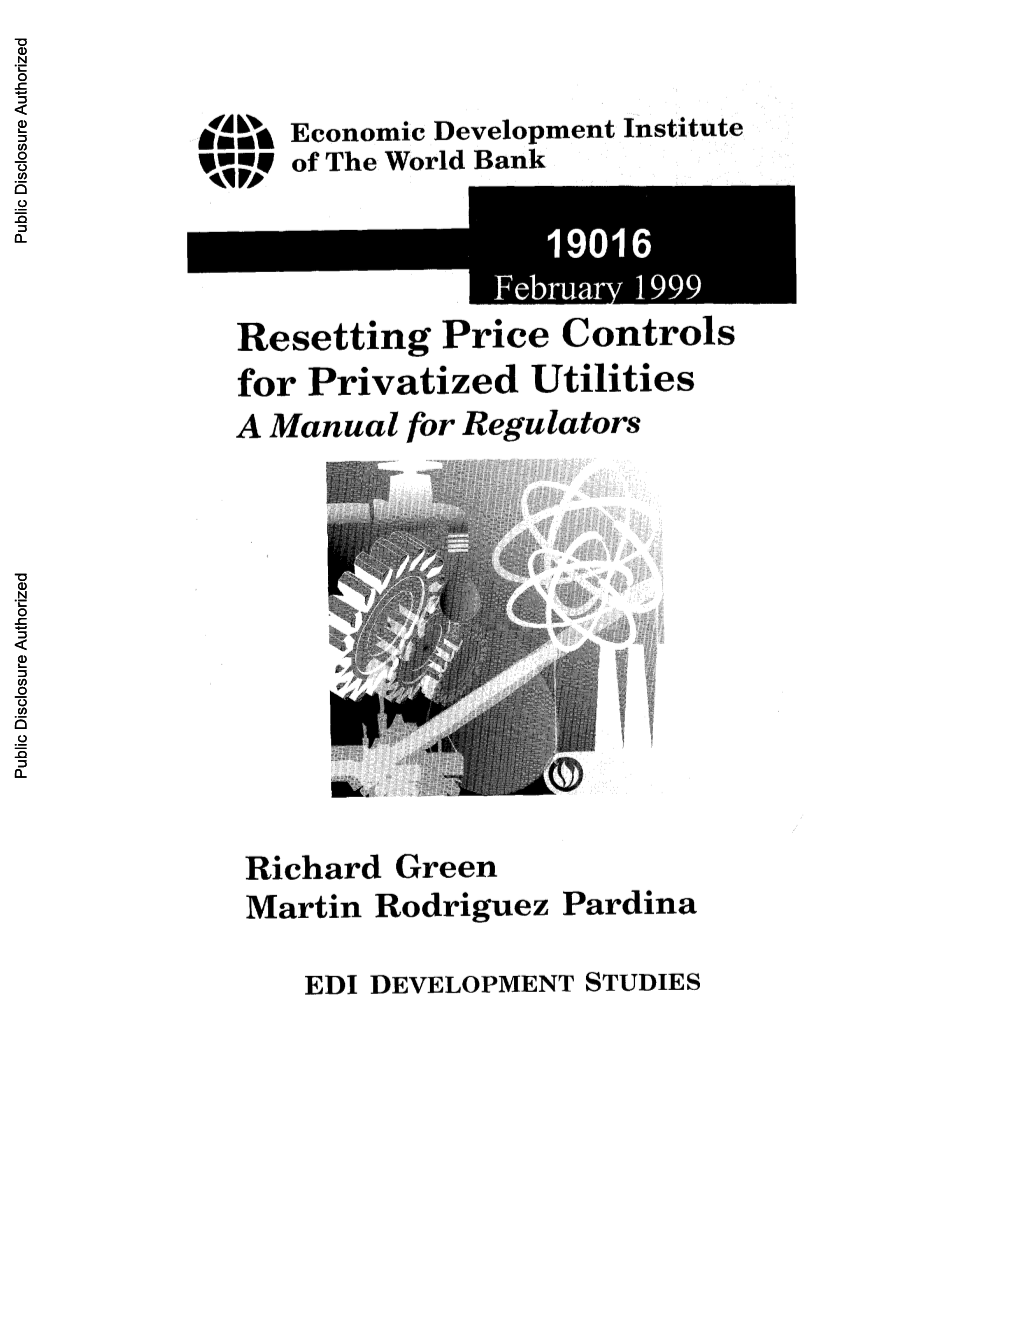 Resetting Price Controls for Privatized Utilities: a Manual for Regulators